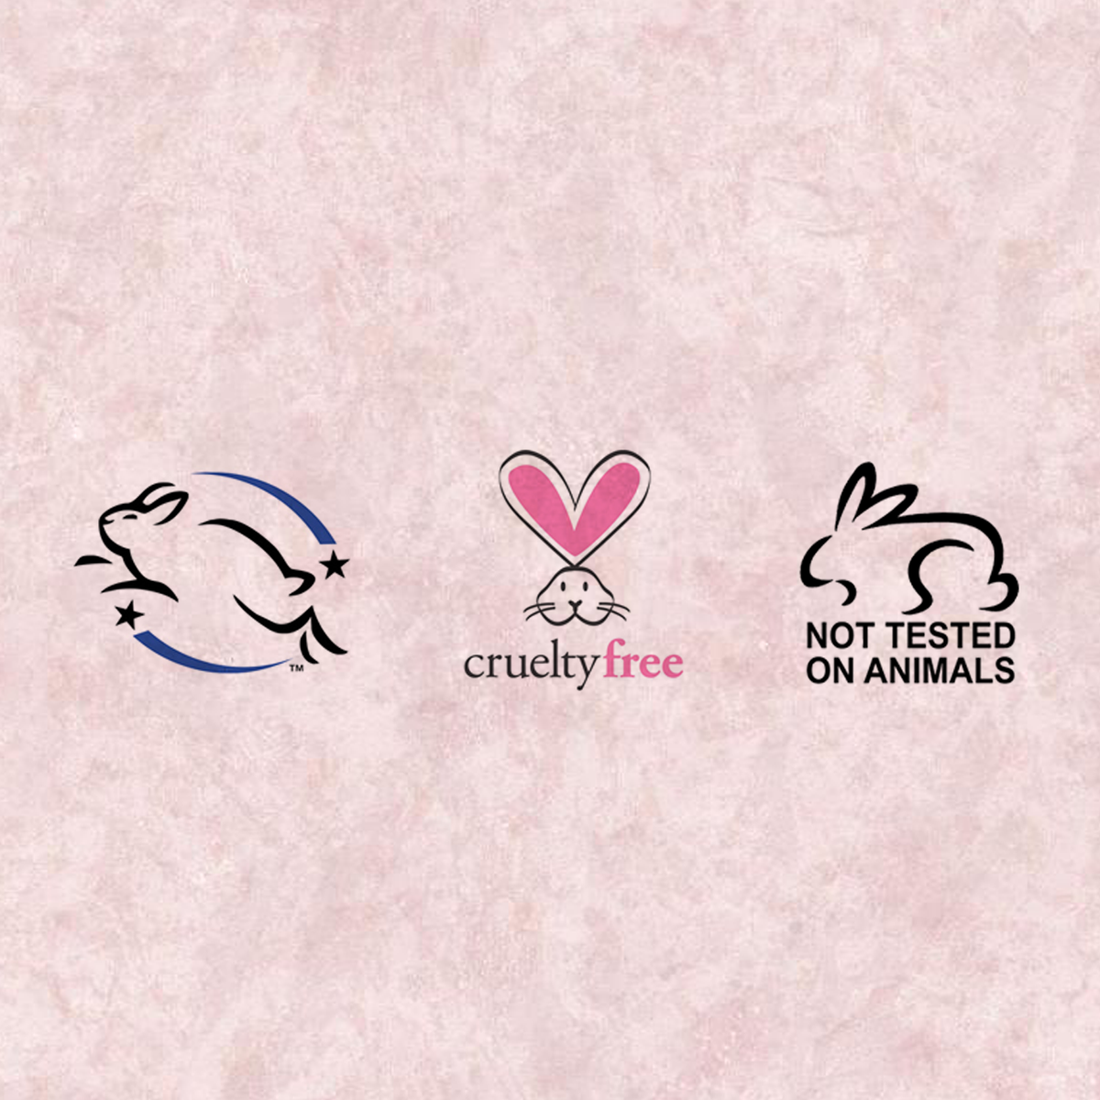 Explained: Cruelty-free Certifications